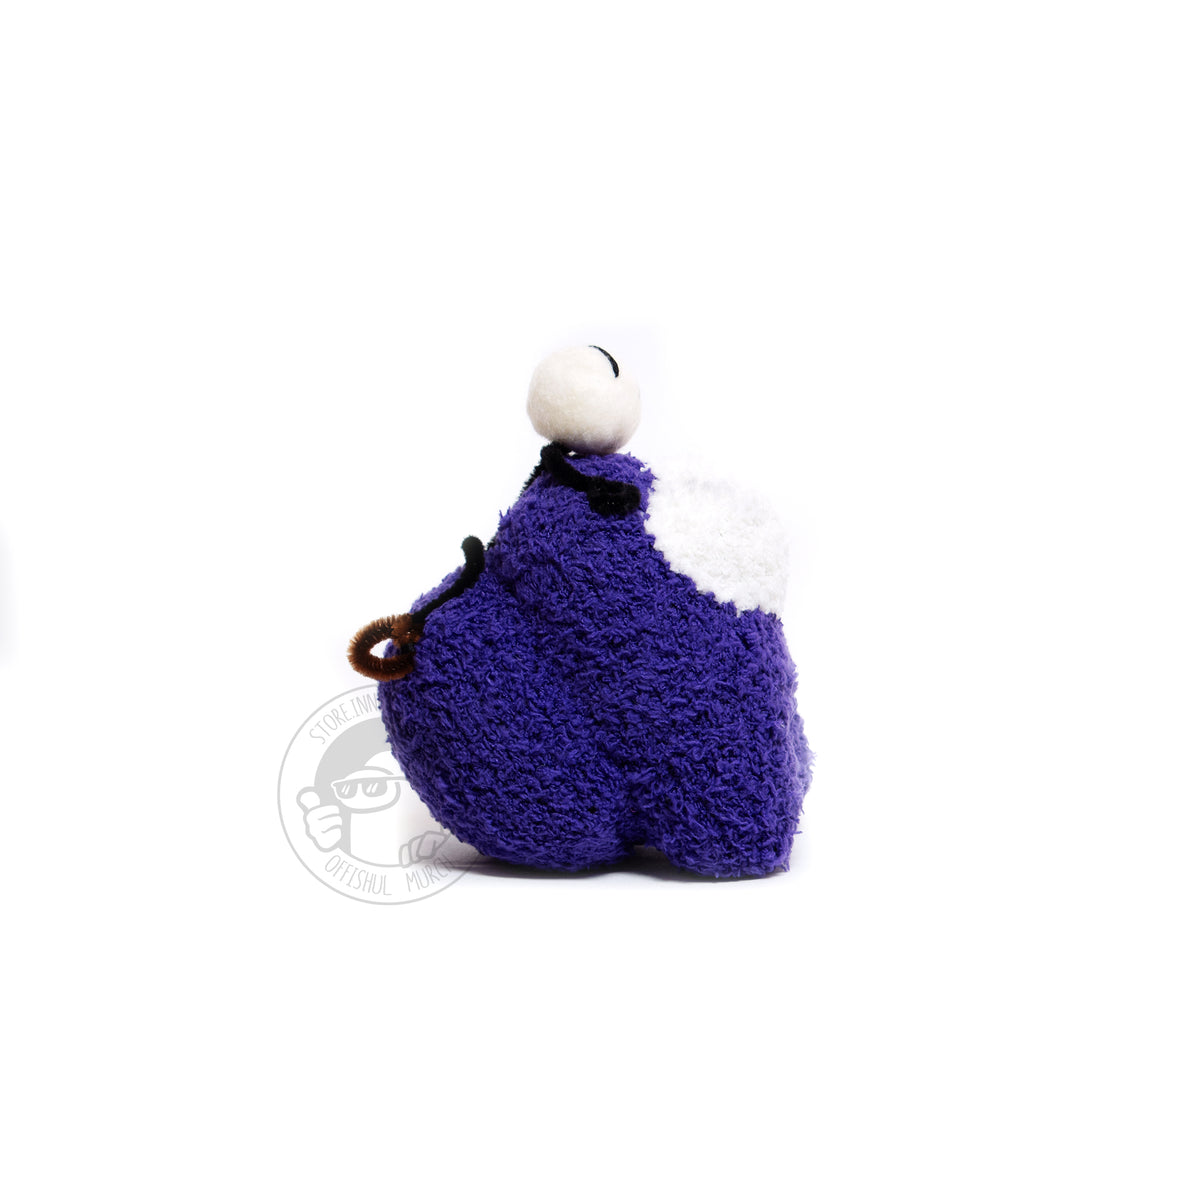 A right-facing profile product photograph of the Purple Crewmate plush with the tiny needle felted and pipe cleaner Henry Stickmin figure on top of its head. From this angle you can see the Crewmate’s big, round, and thick backpack in full view.